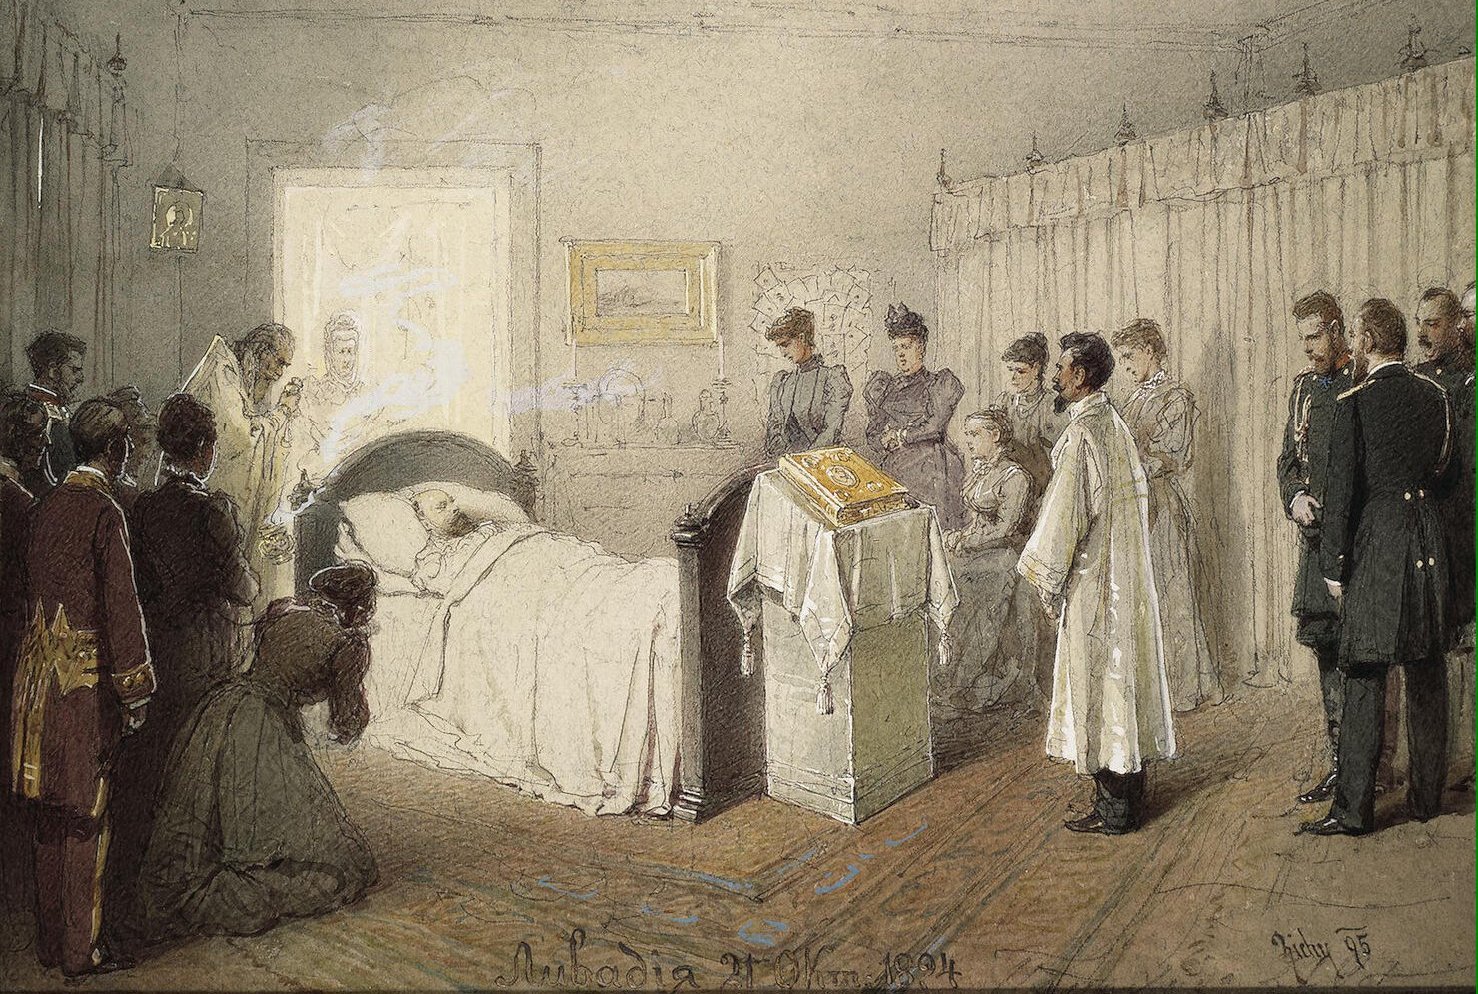 Depiction of Alexander III on his deathbed